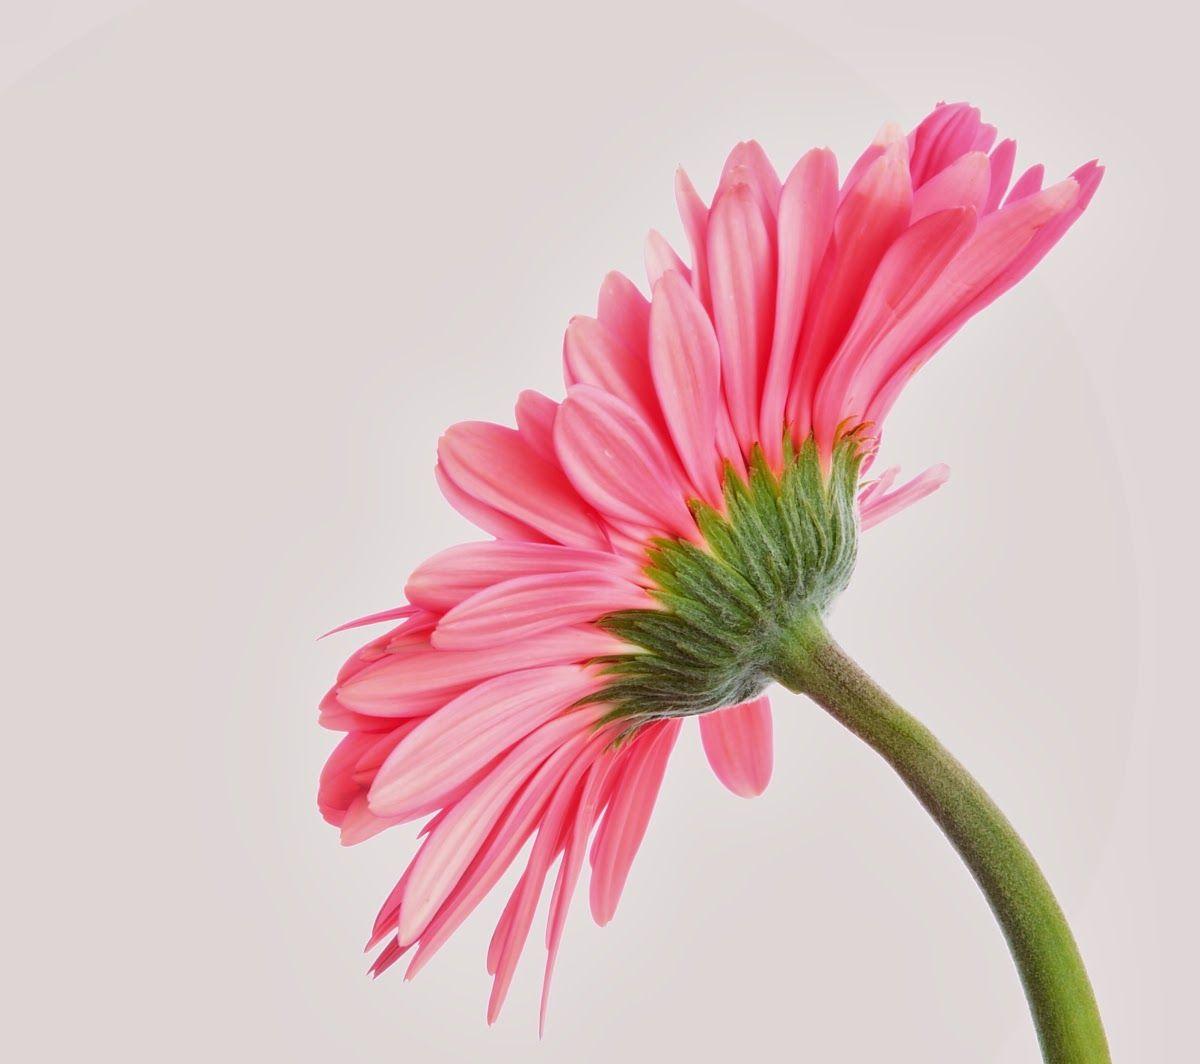 Photographing Flowers on White Background